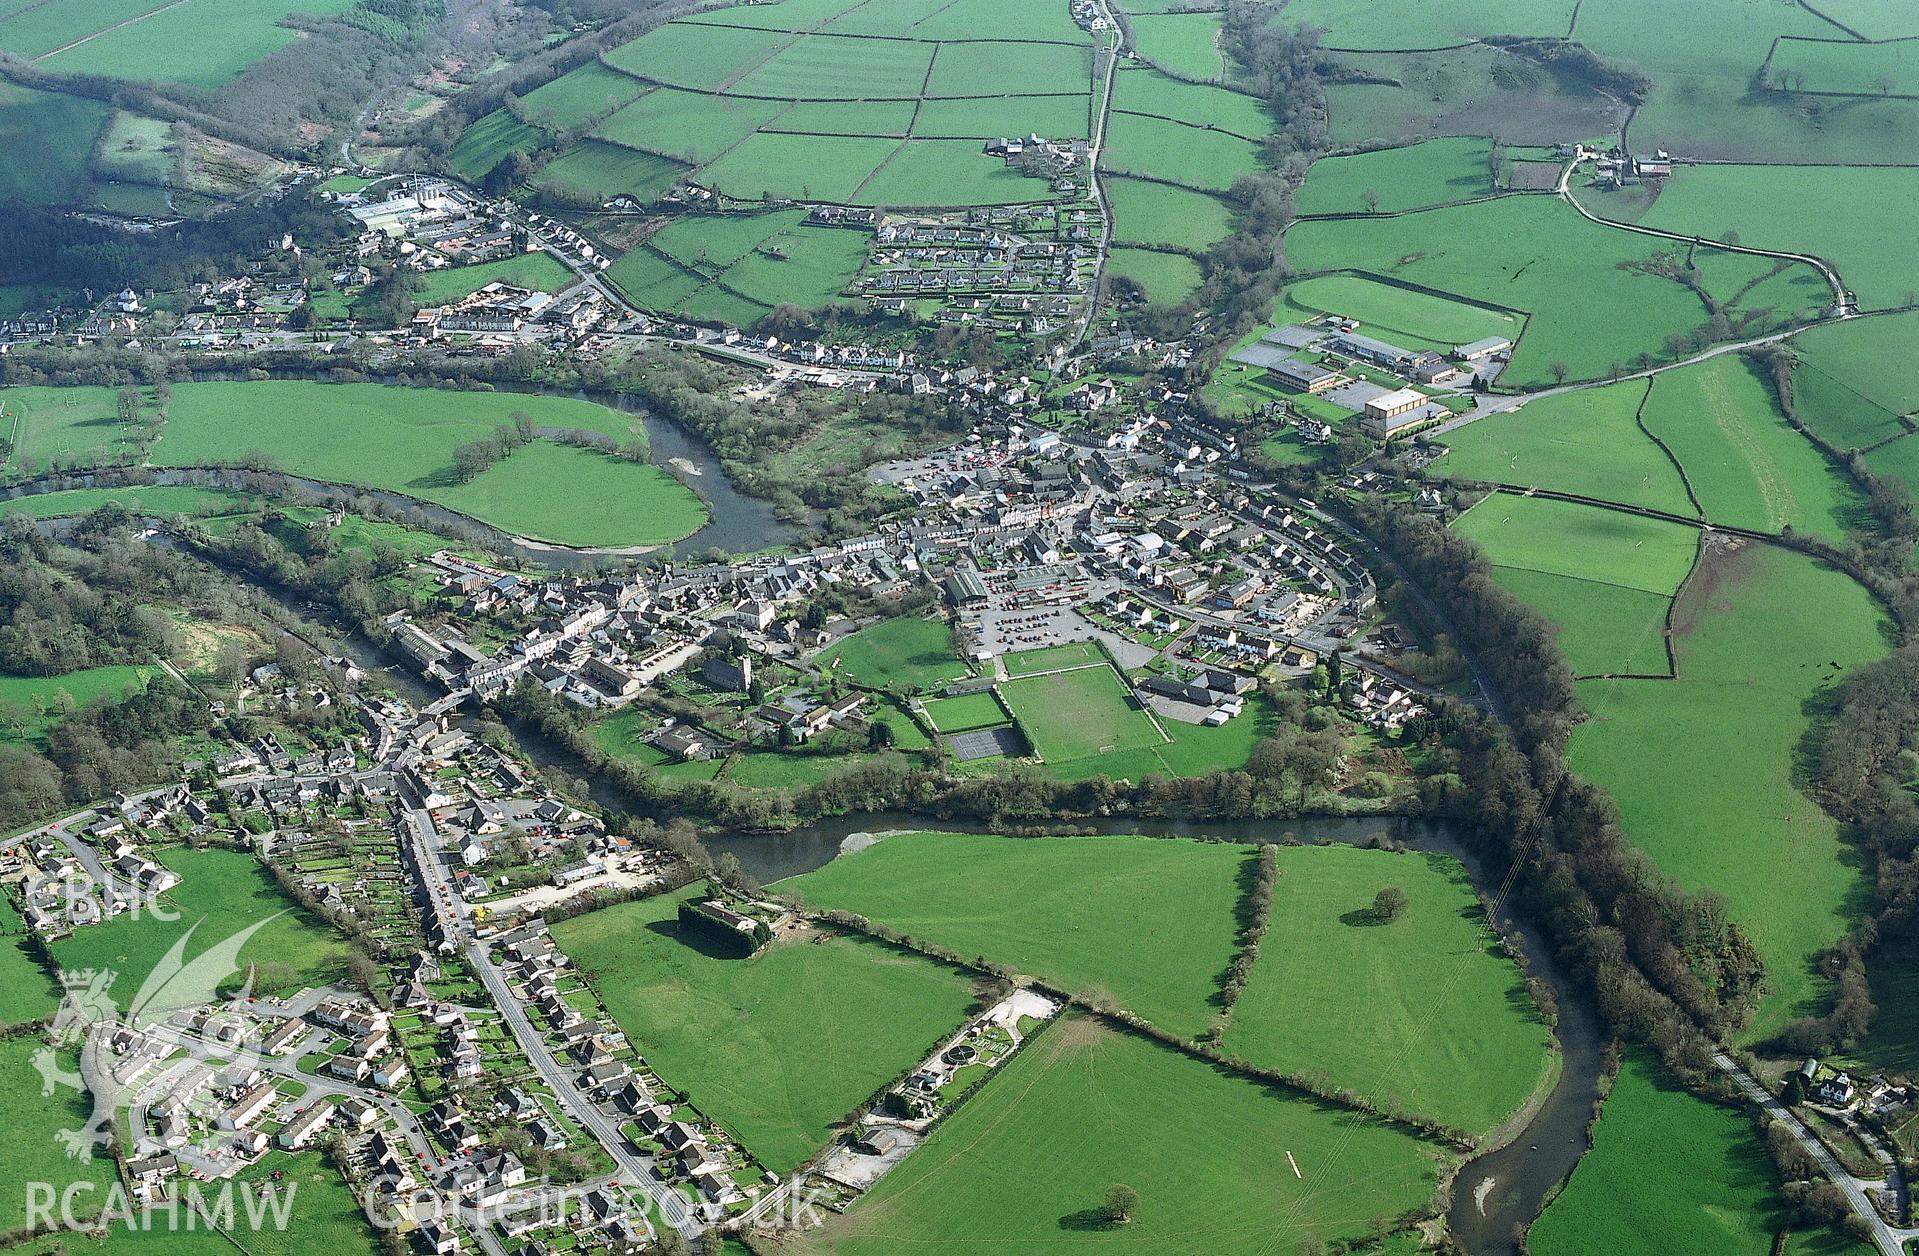 Slide of RCAHMW colour oblique aerial photograph of Newcastle Emlyn, taken by T.G. Driver, 31/3/1998.